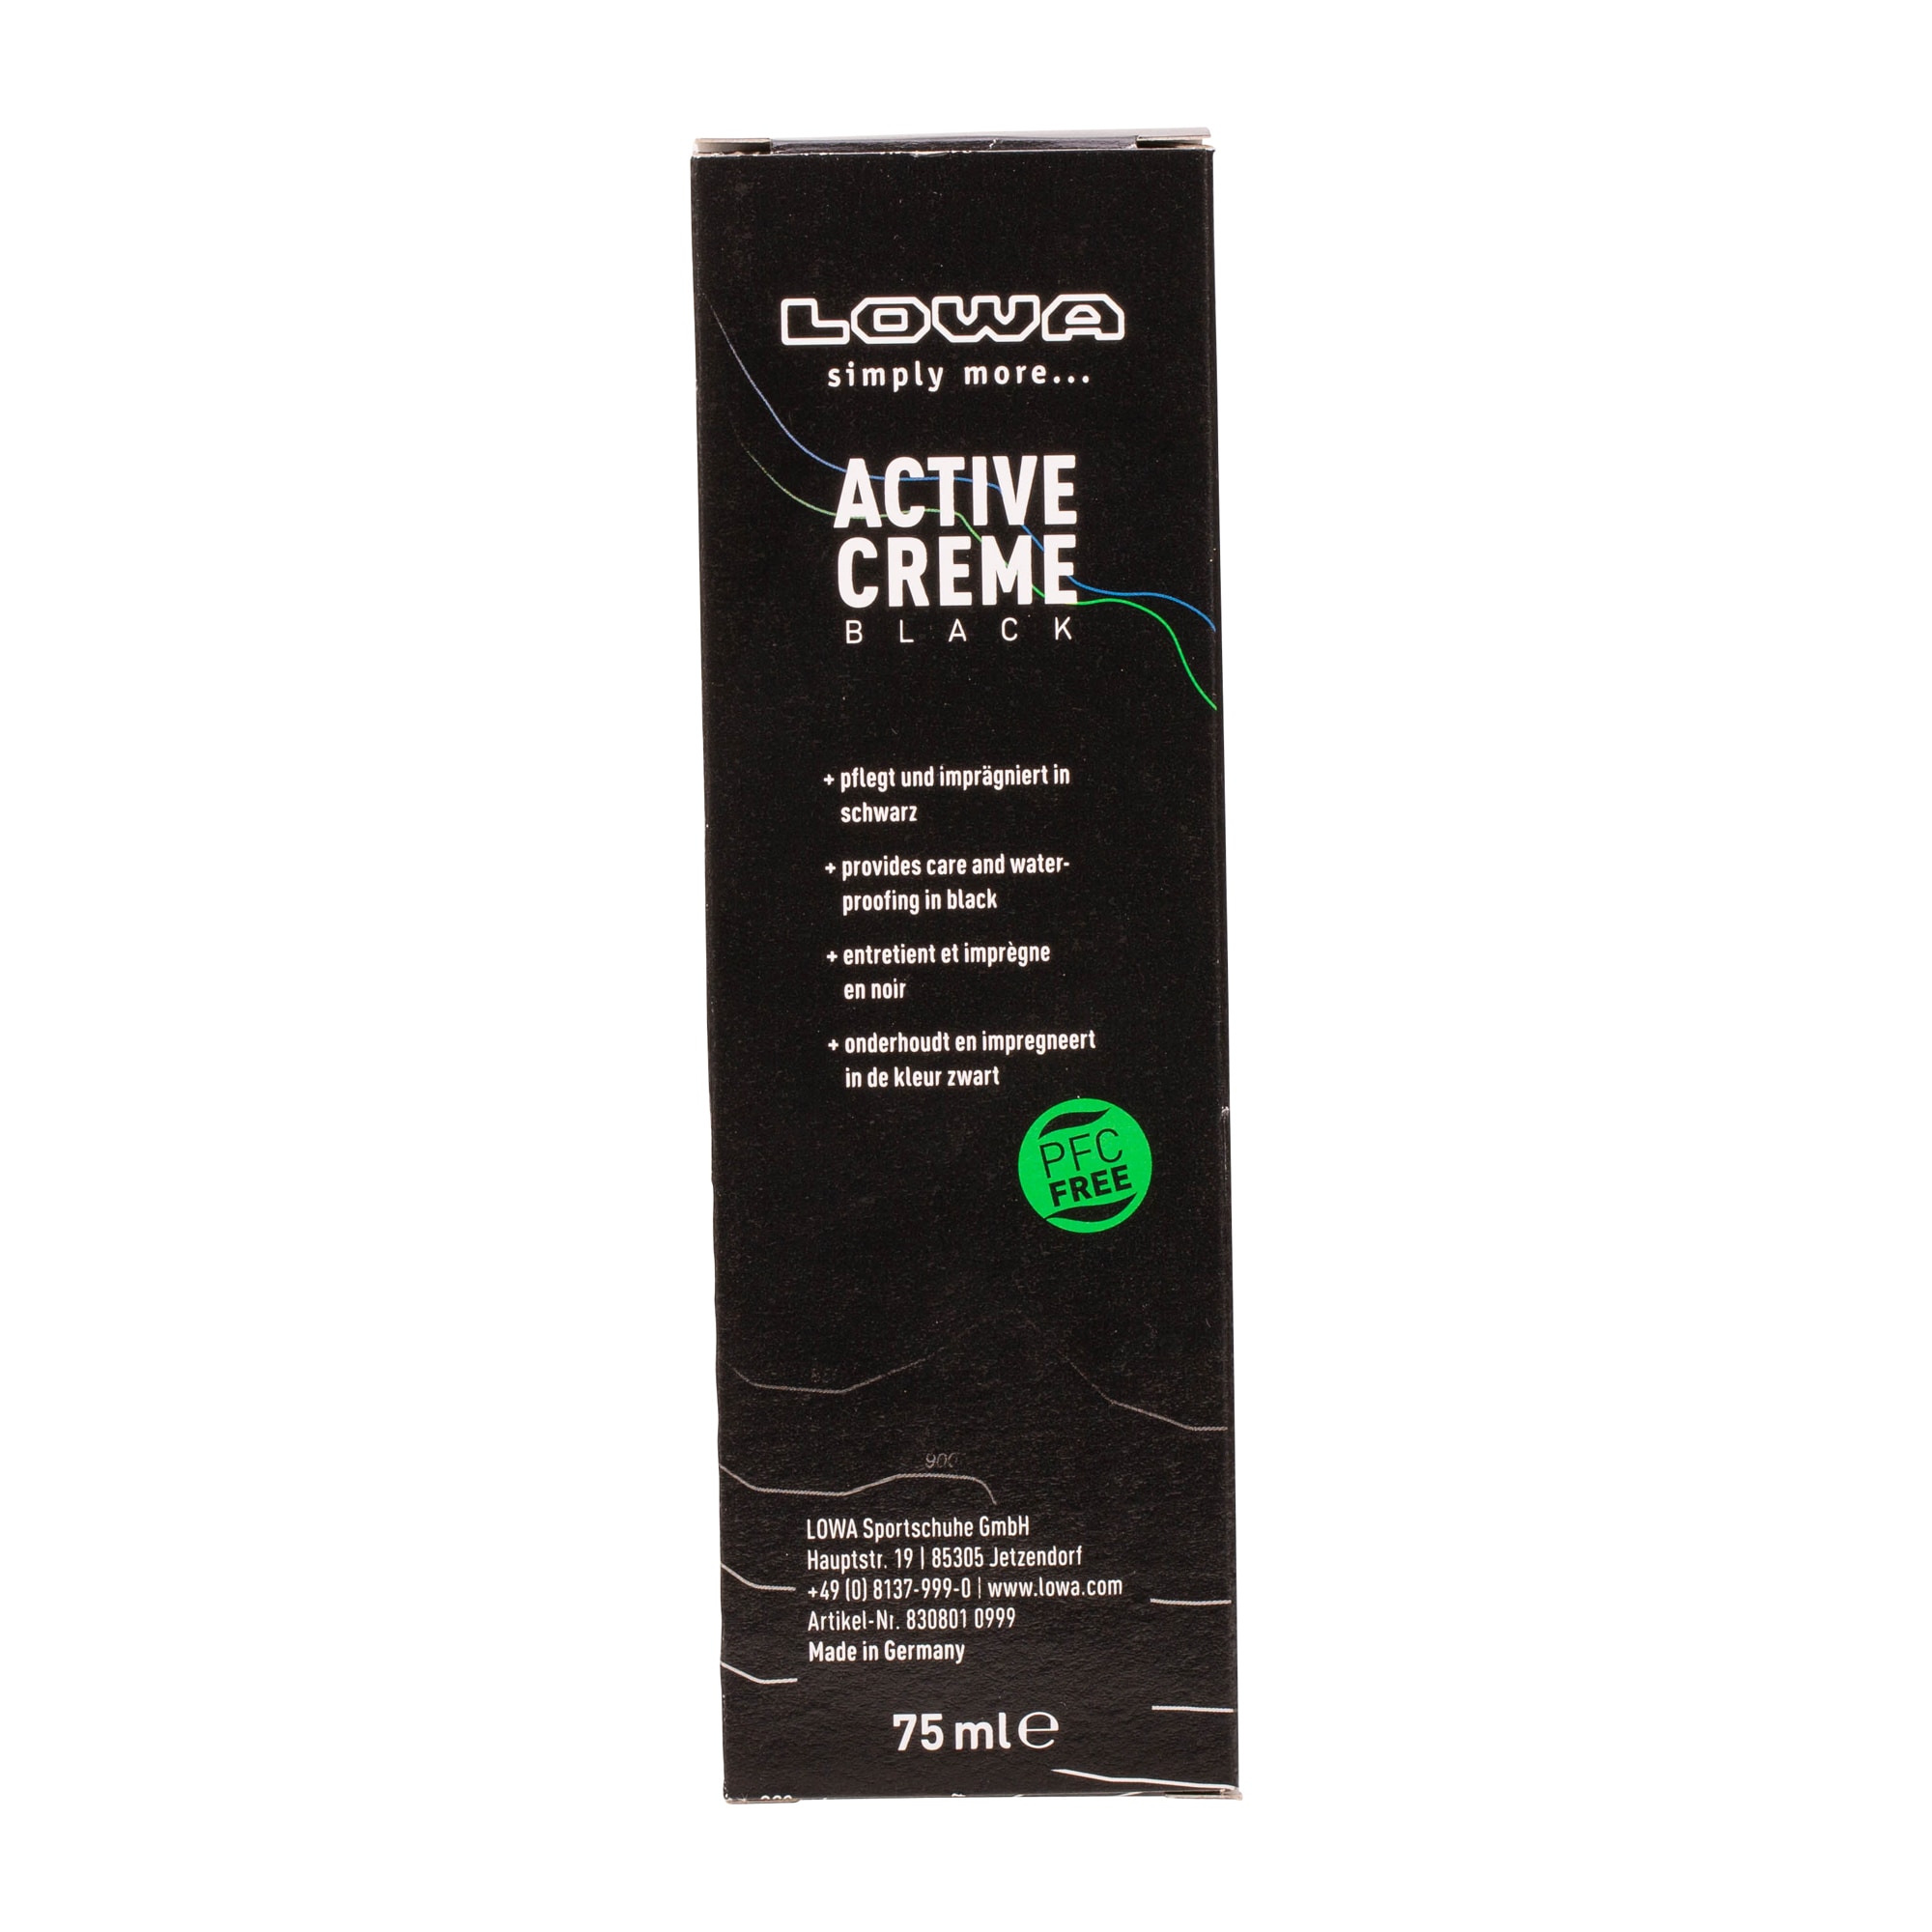 Purchase the Lowa Shoe Cream Active Cream Edition by ASMC